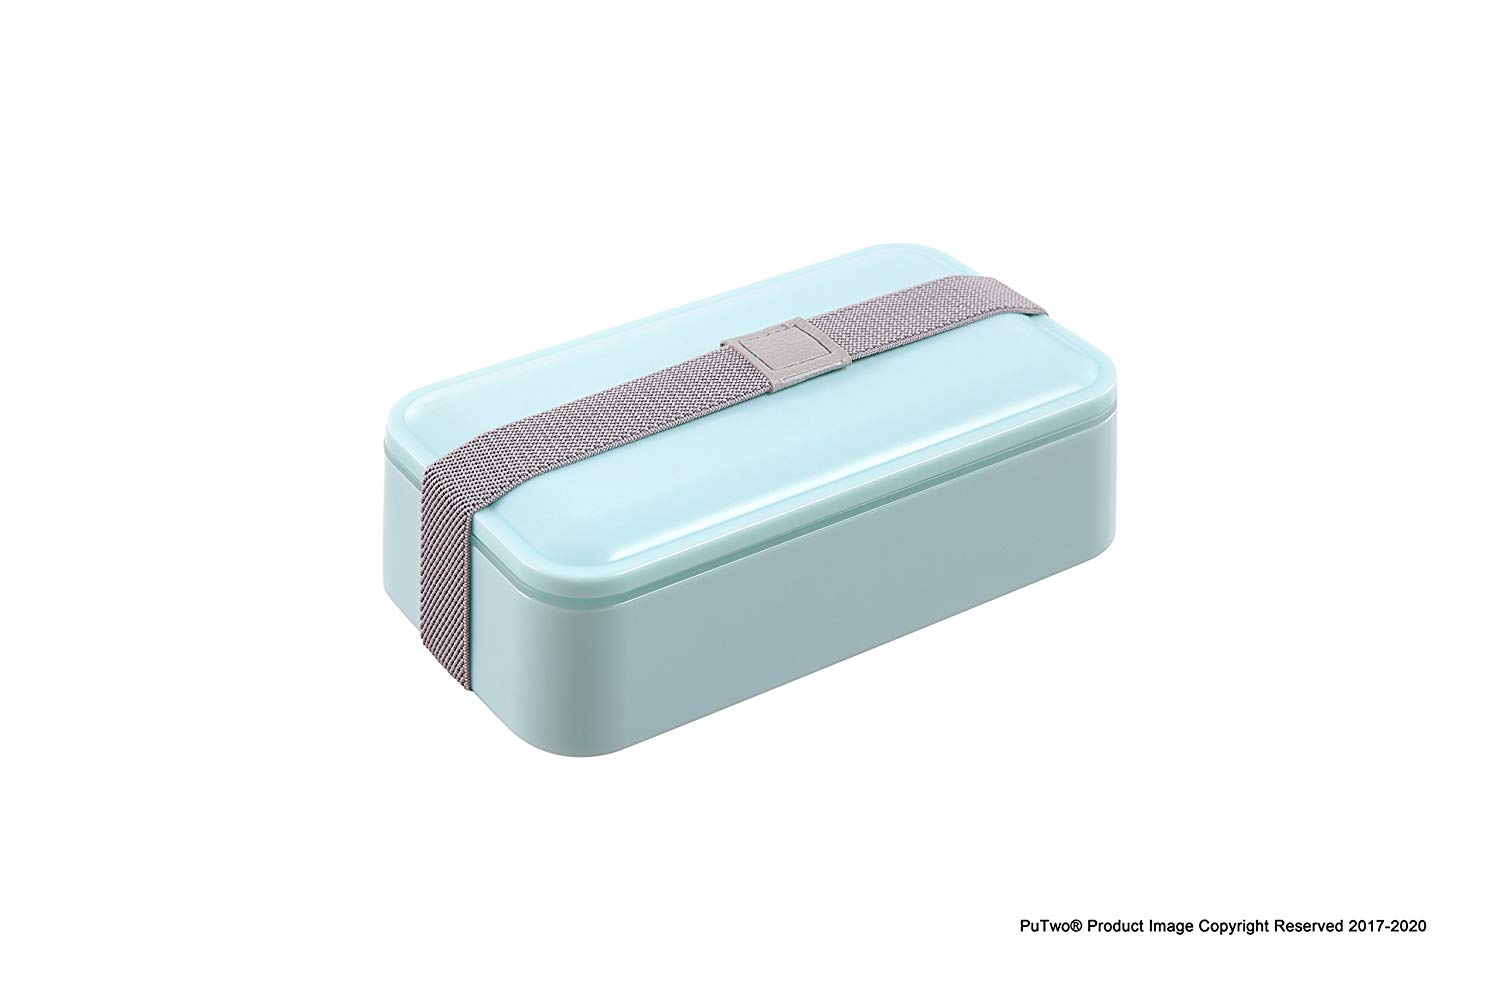 Bento Box 2 Tiers Bento Lunch Box Lunch Boxes with Reusable Cutlery Japanese Style for Microwave Freezer Dishwasher Bento Boxes for Kids Adults Work School - Pastel Blue PuTwo - image 5 of 6